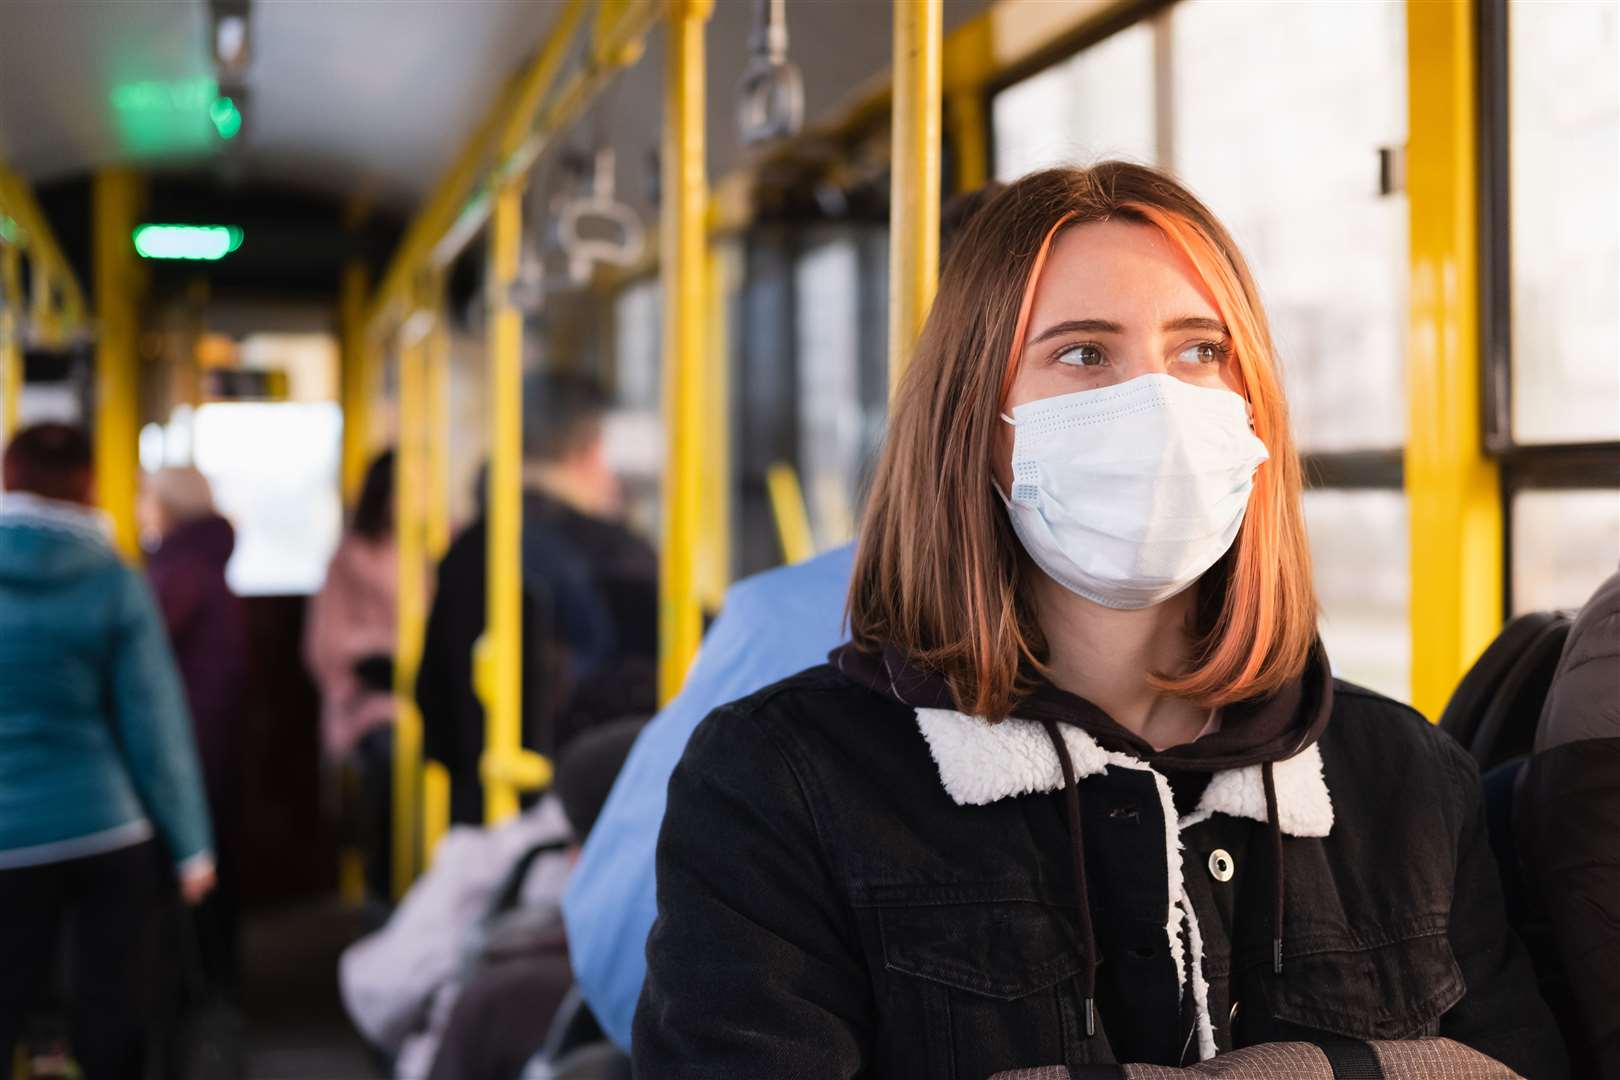 Masks are once again required on public transport